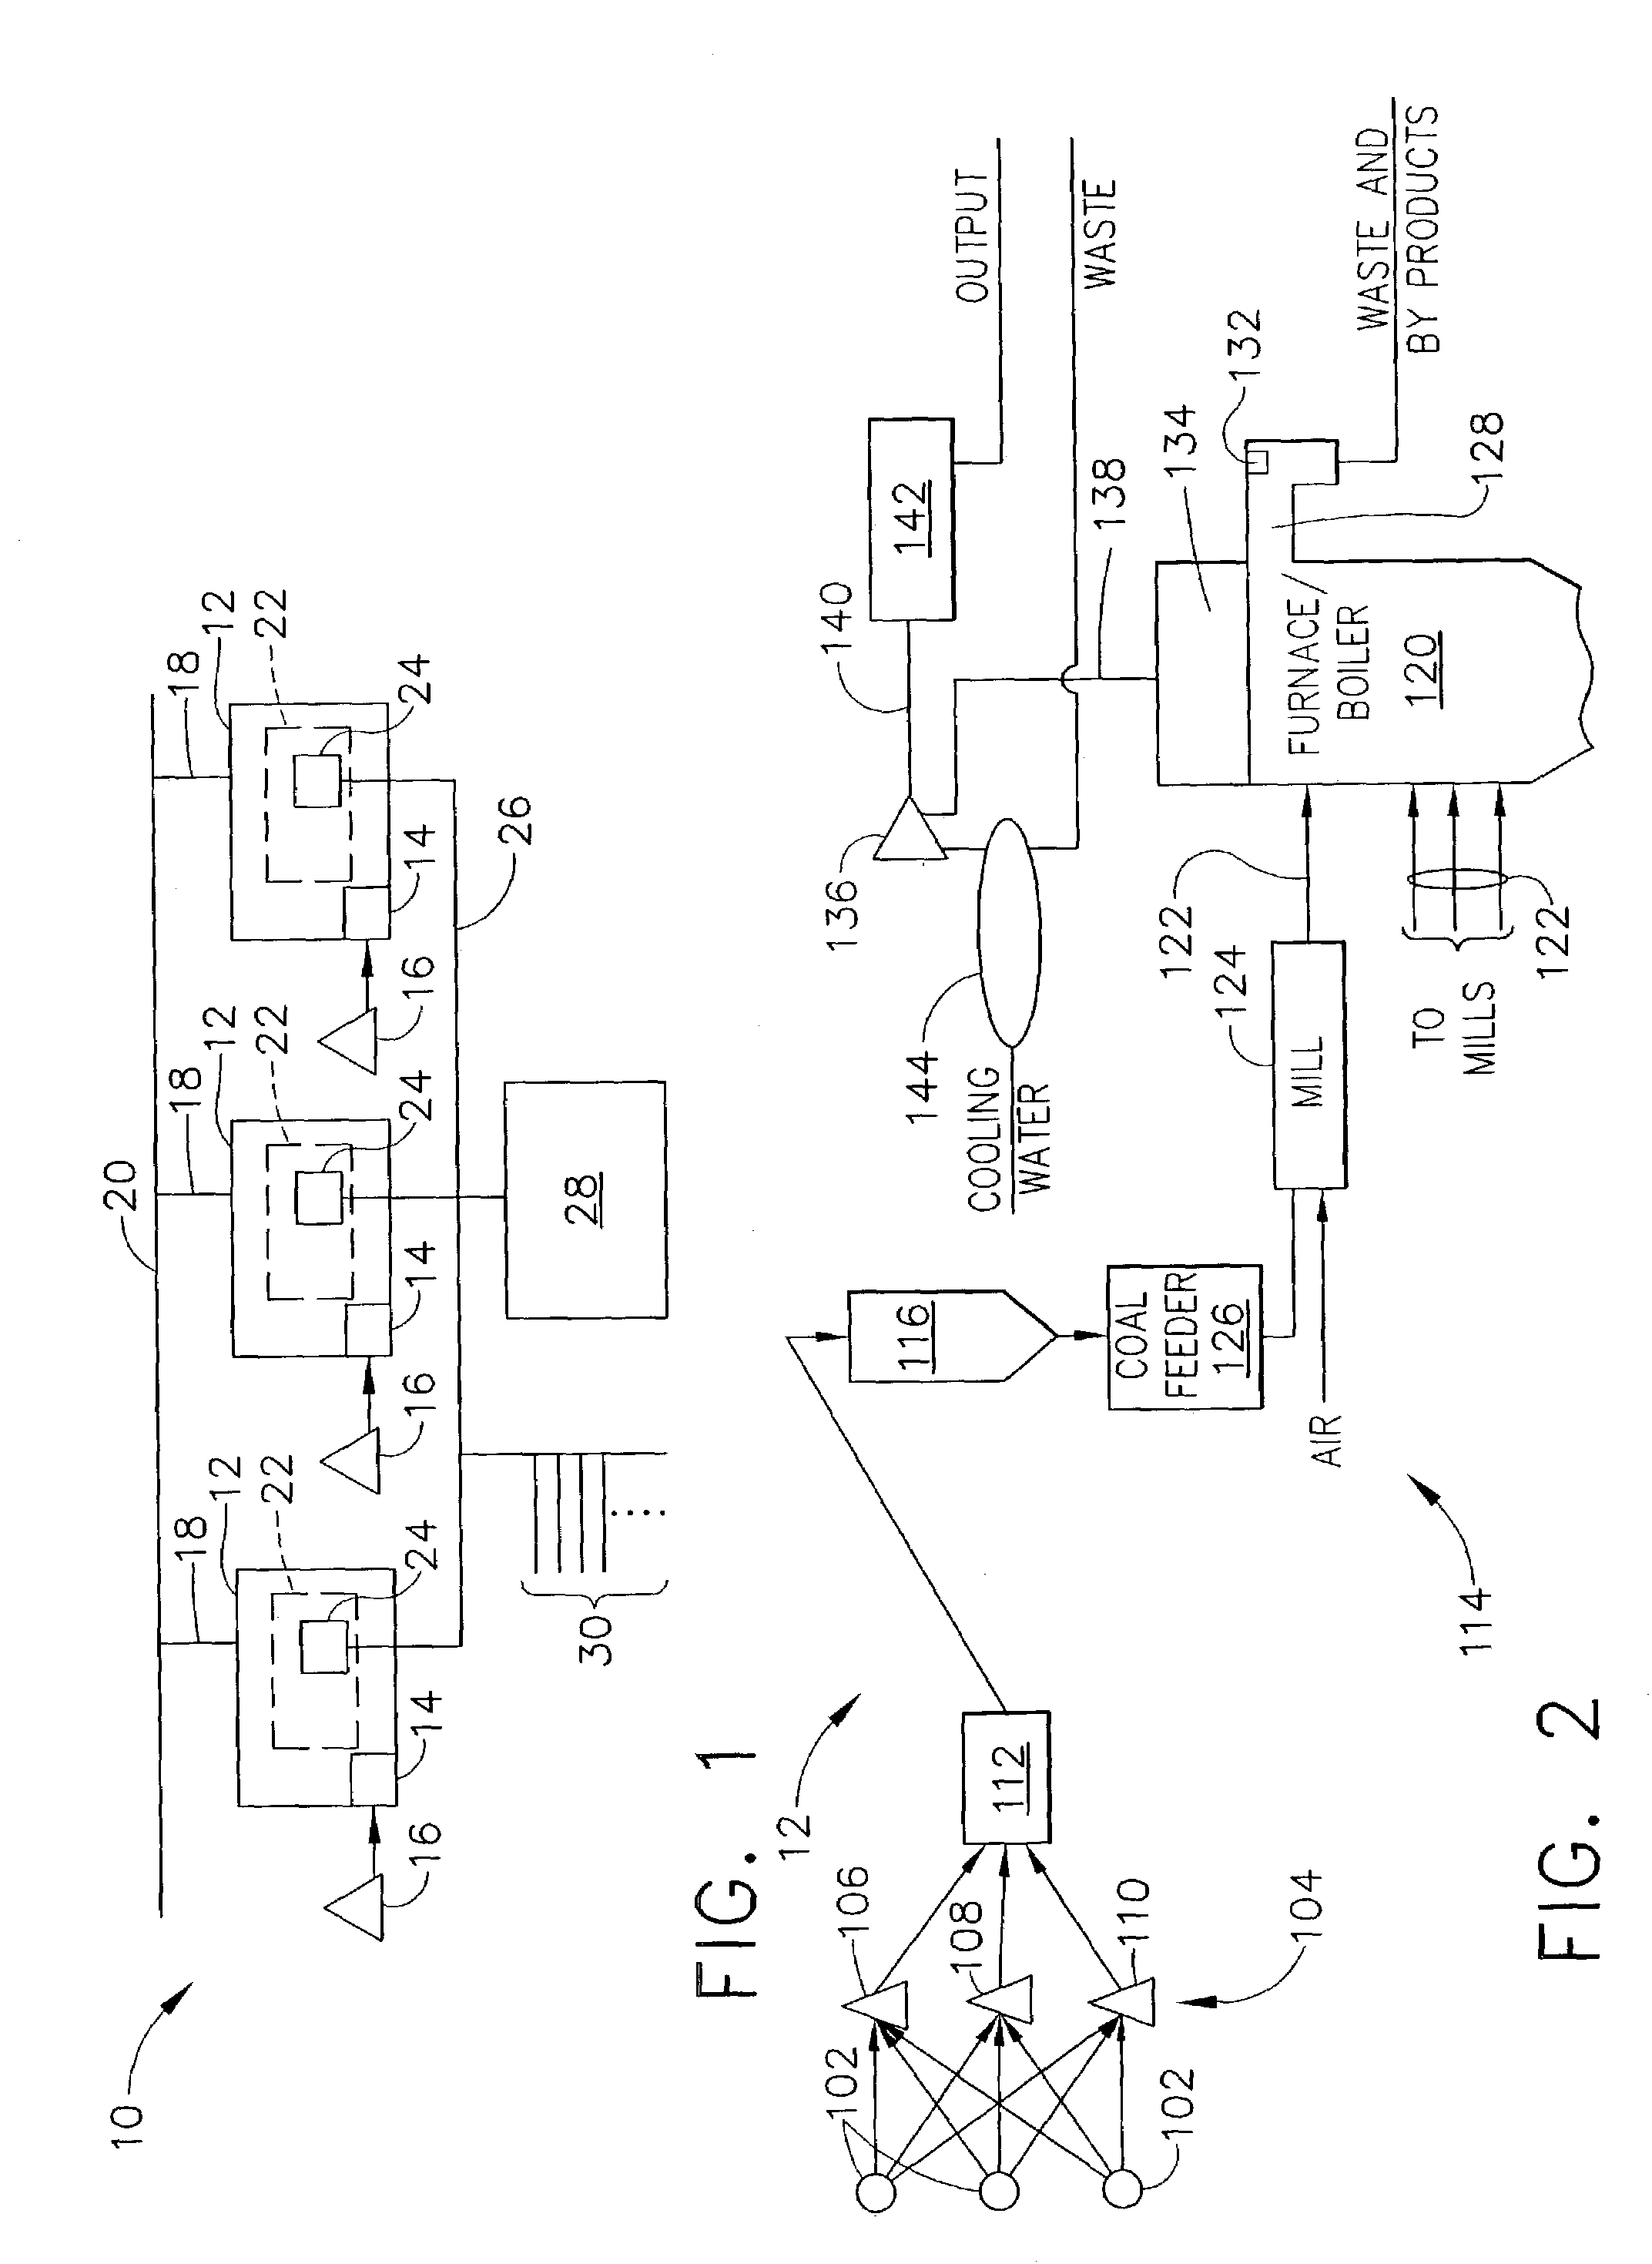 Methods and apparatus for operating production facilities